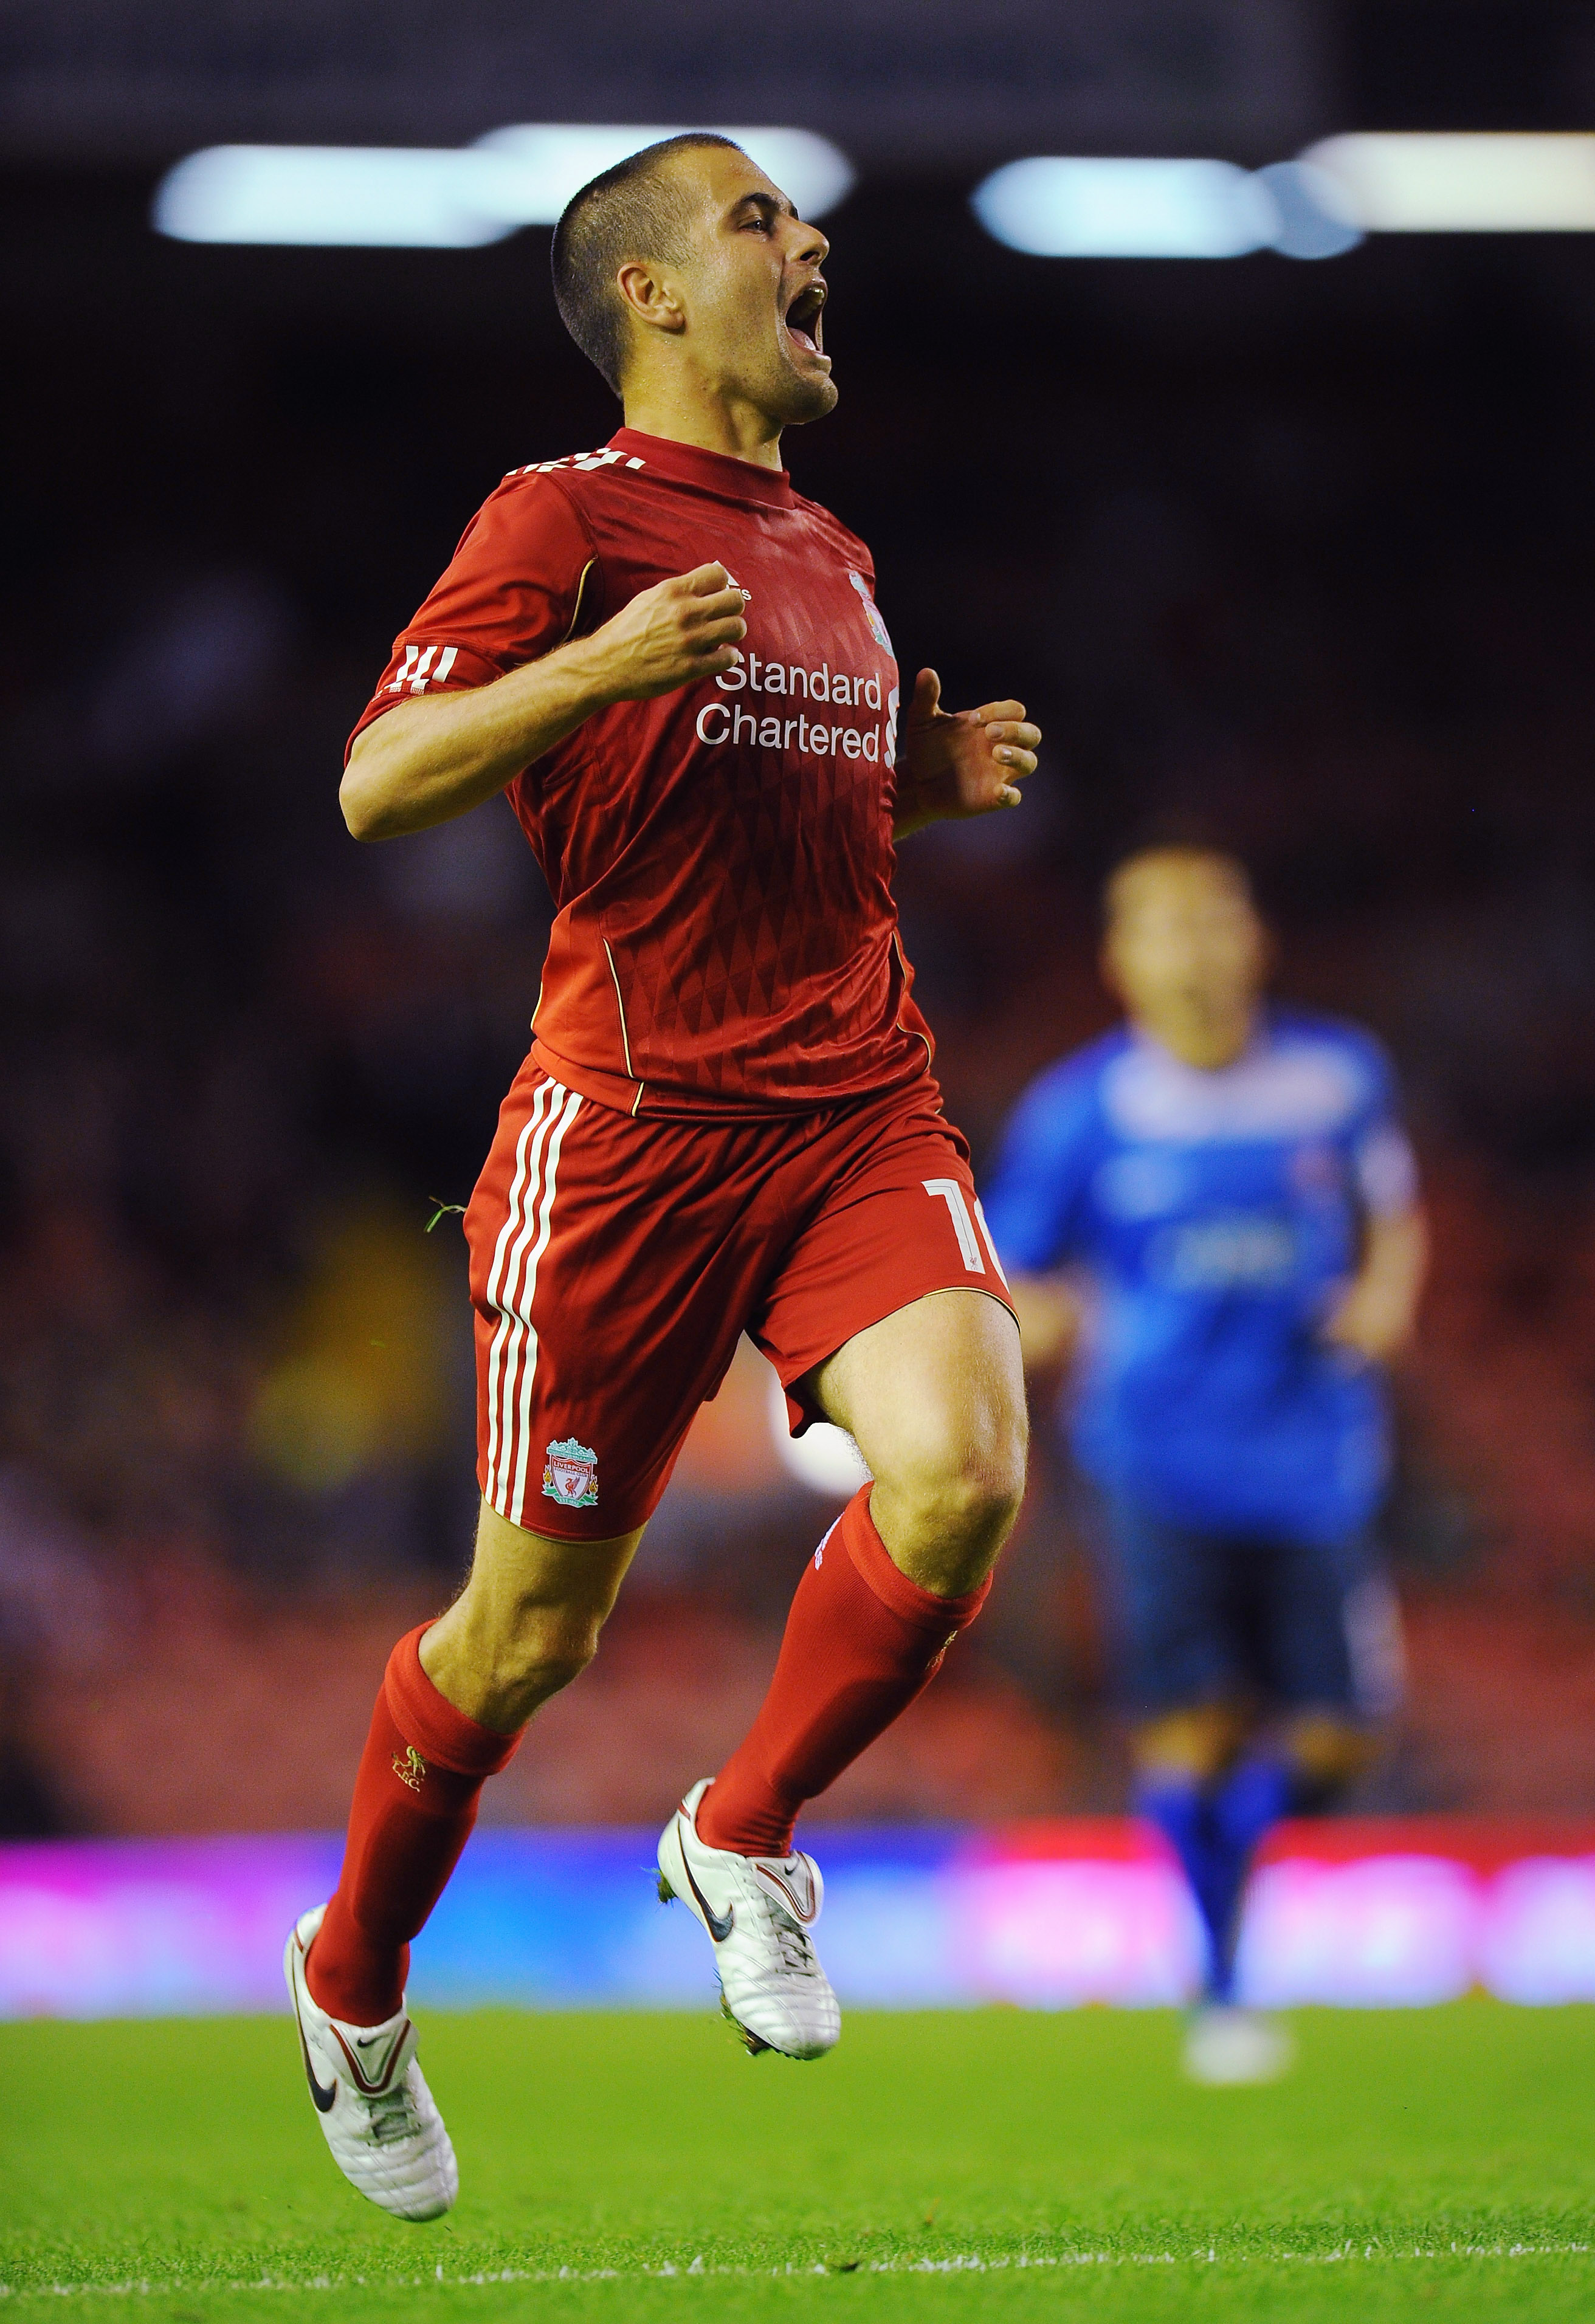 LIVERPOOL, ENGLAND - AUGUST 05:  Joe Cole of Liverpool shows his frustration during the Europa League, Third Qualifying Round, Second Leg match between Liverpool and FK Rabotnicki at Anfield on August 5, 2010 in Liverpool, England.  (Photo by Clive Mason/